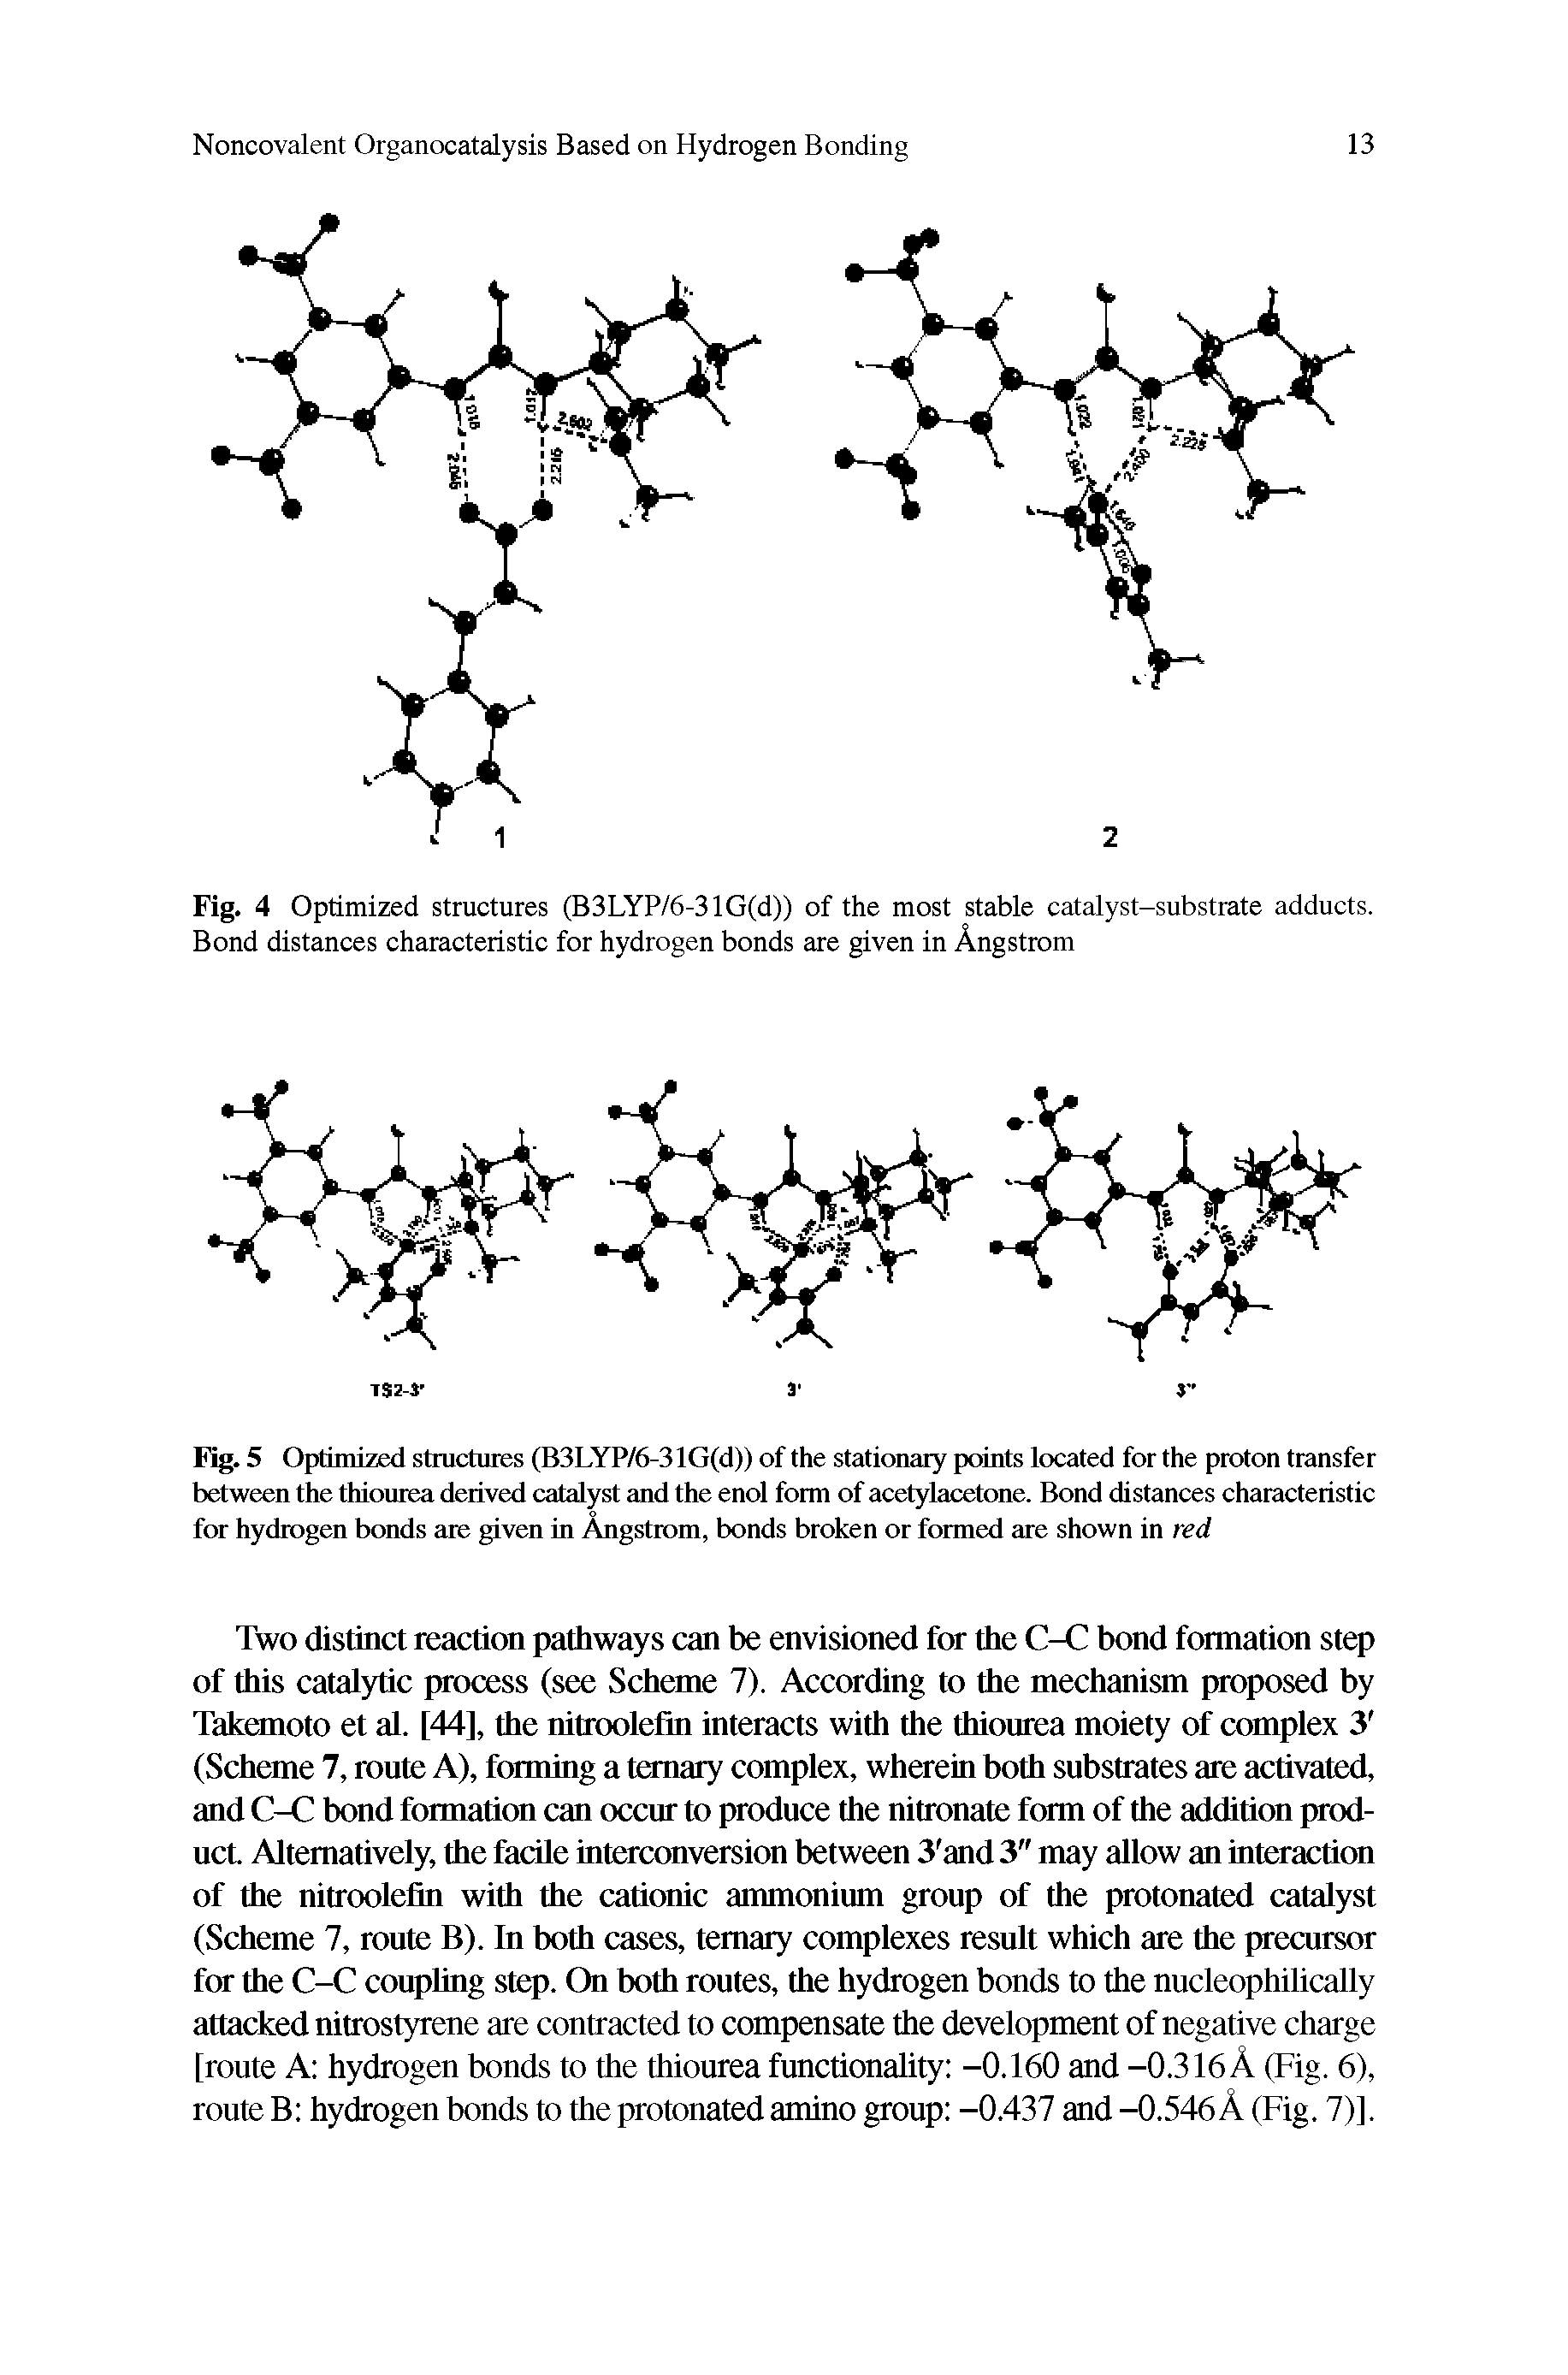 Fig. 5 Optimized structures (B3LYP/6-31G(d)) of the stationary points located for the proton transfer between the thiourea derived catalyst and the enol form of acetylacetone. Bond distances characteristic for hydrogen bonds are given in Angstrom, bonds broken or formed are shown in red...